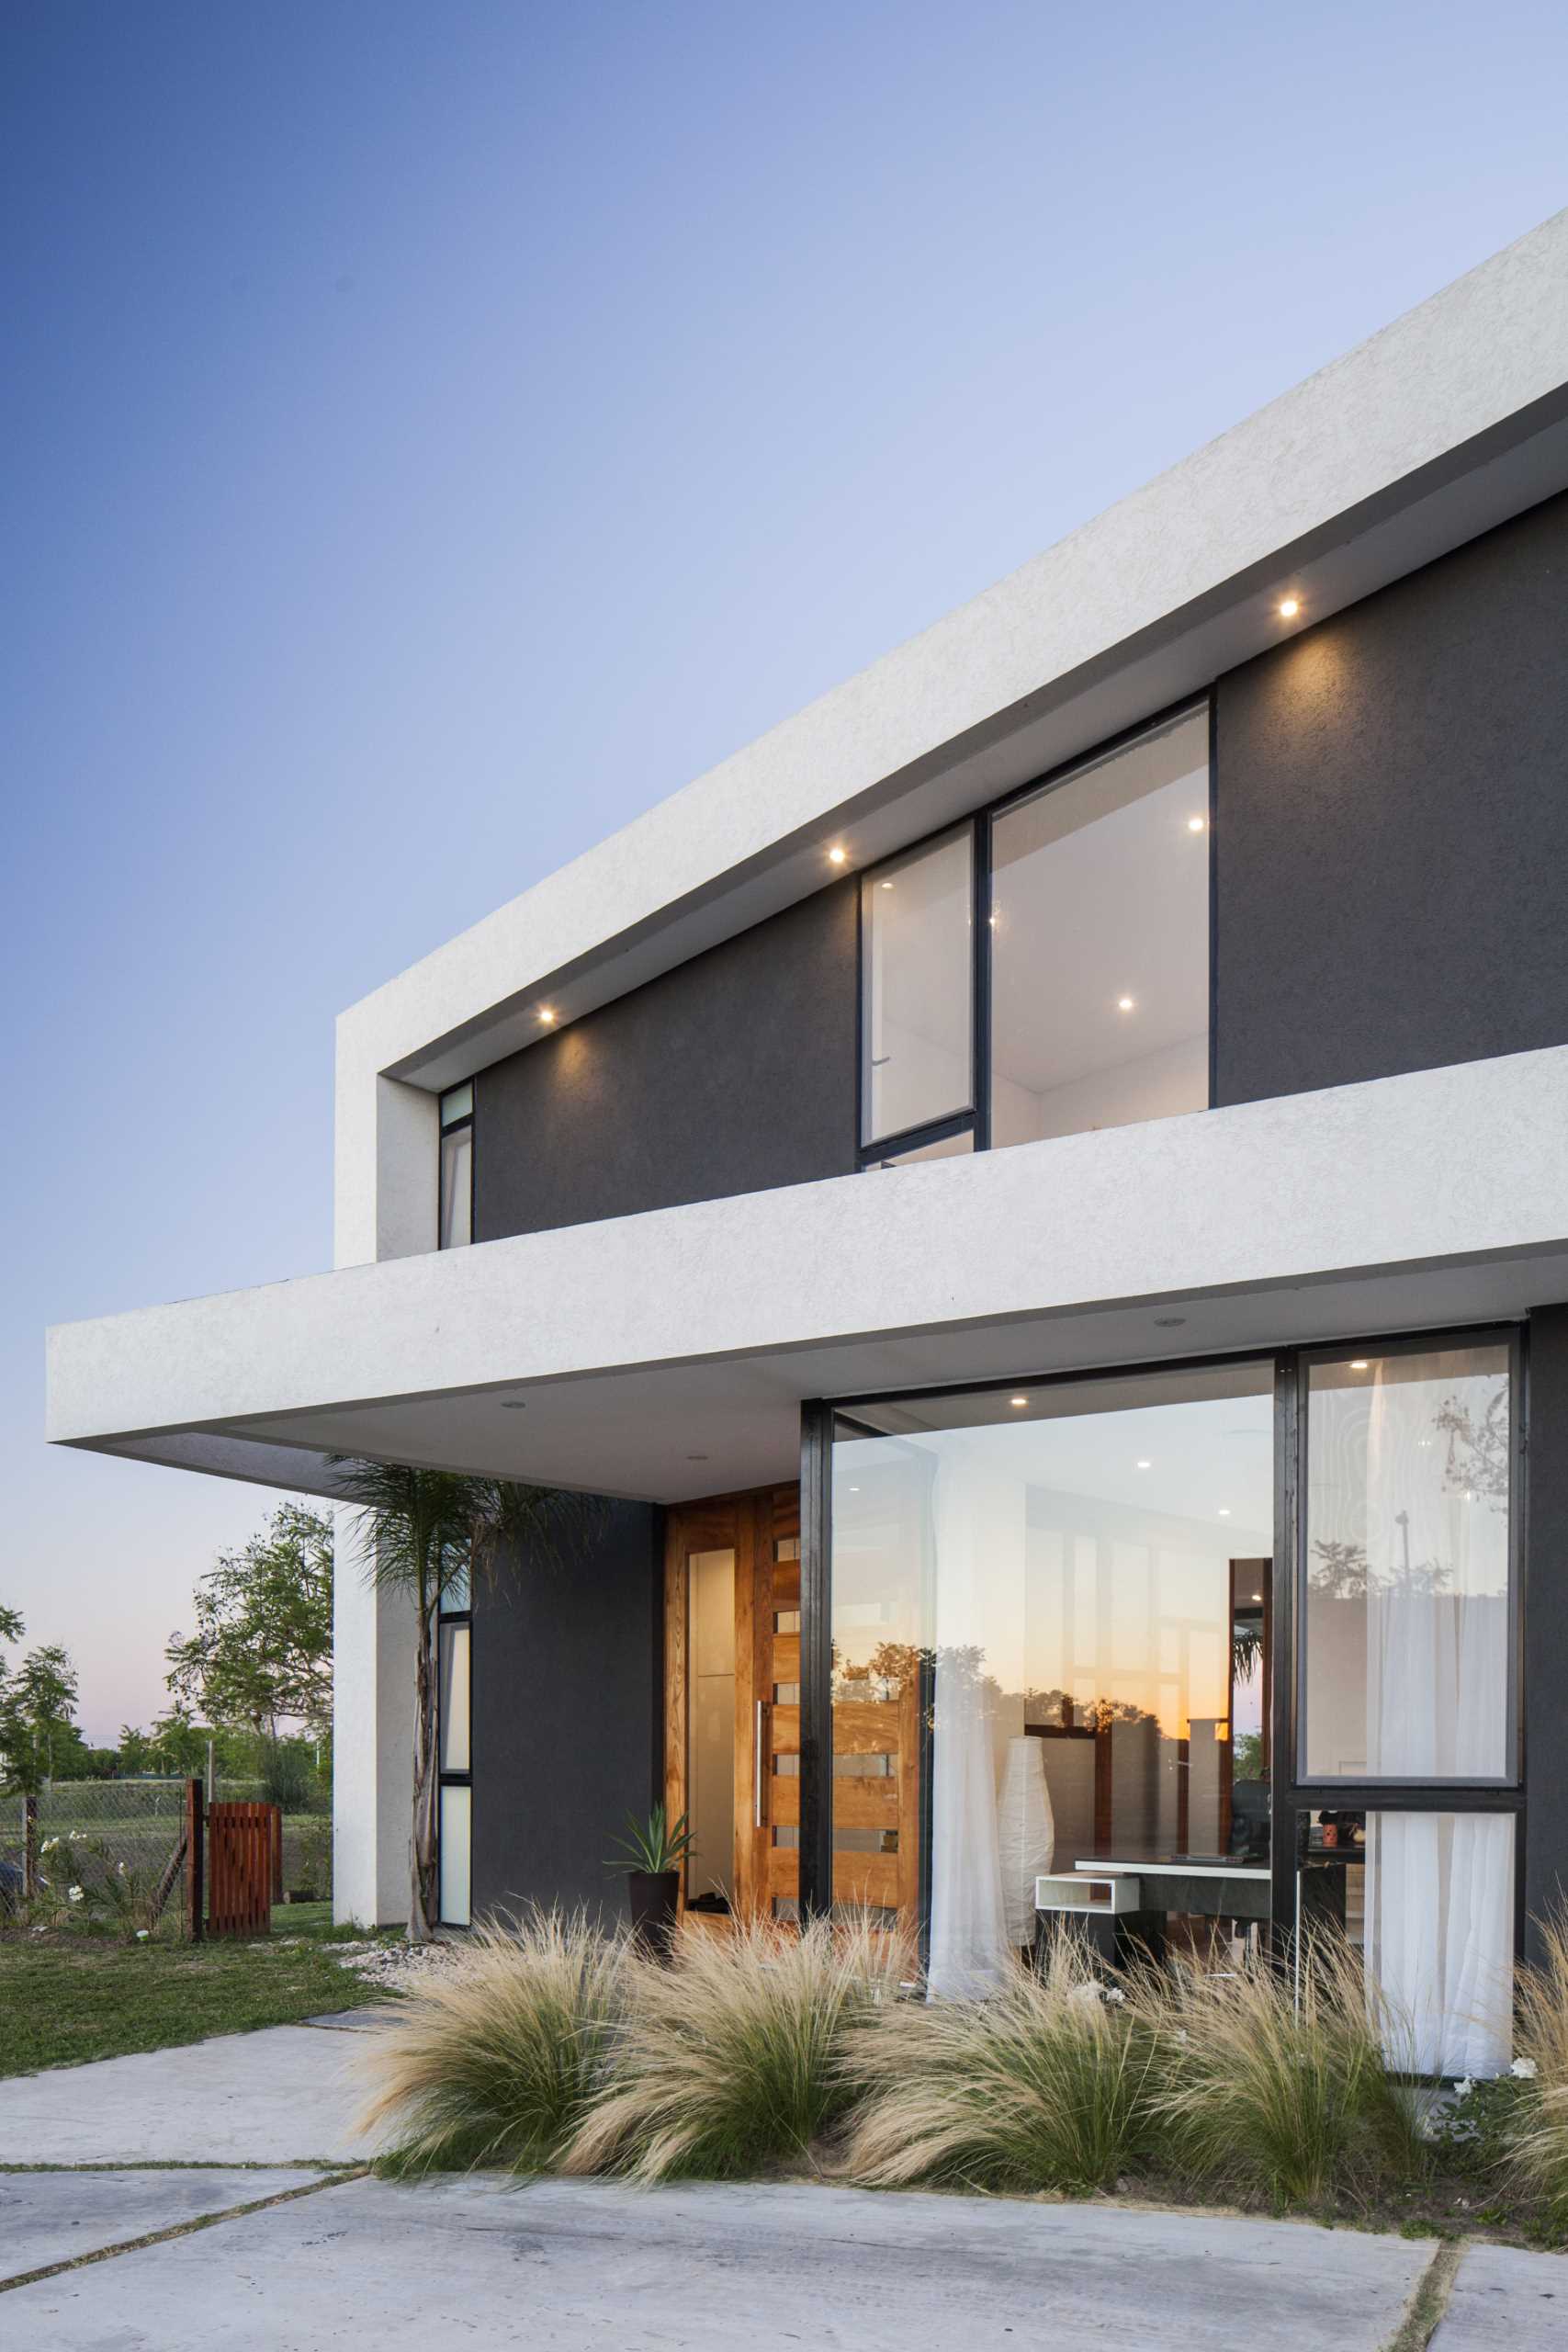 A modern home whose shape is based on the idea of turning boxes.